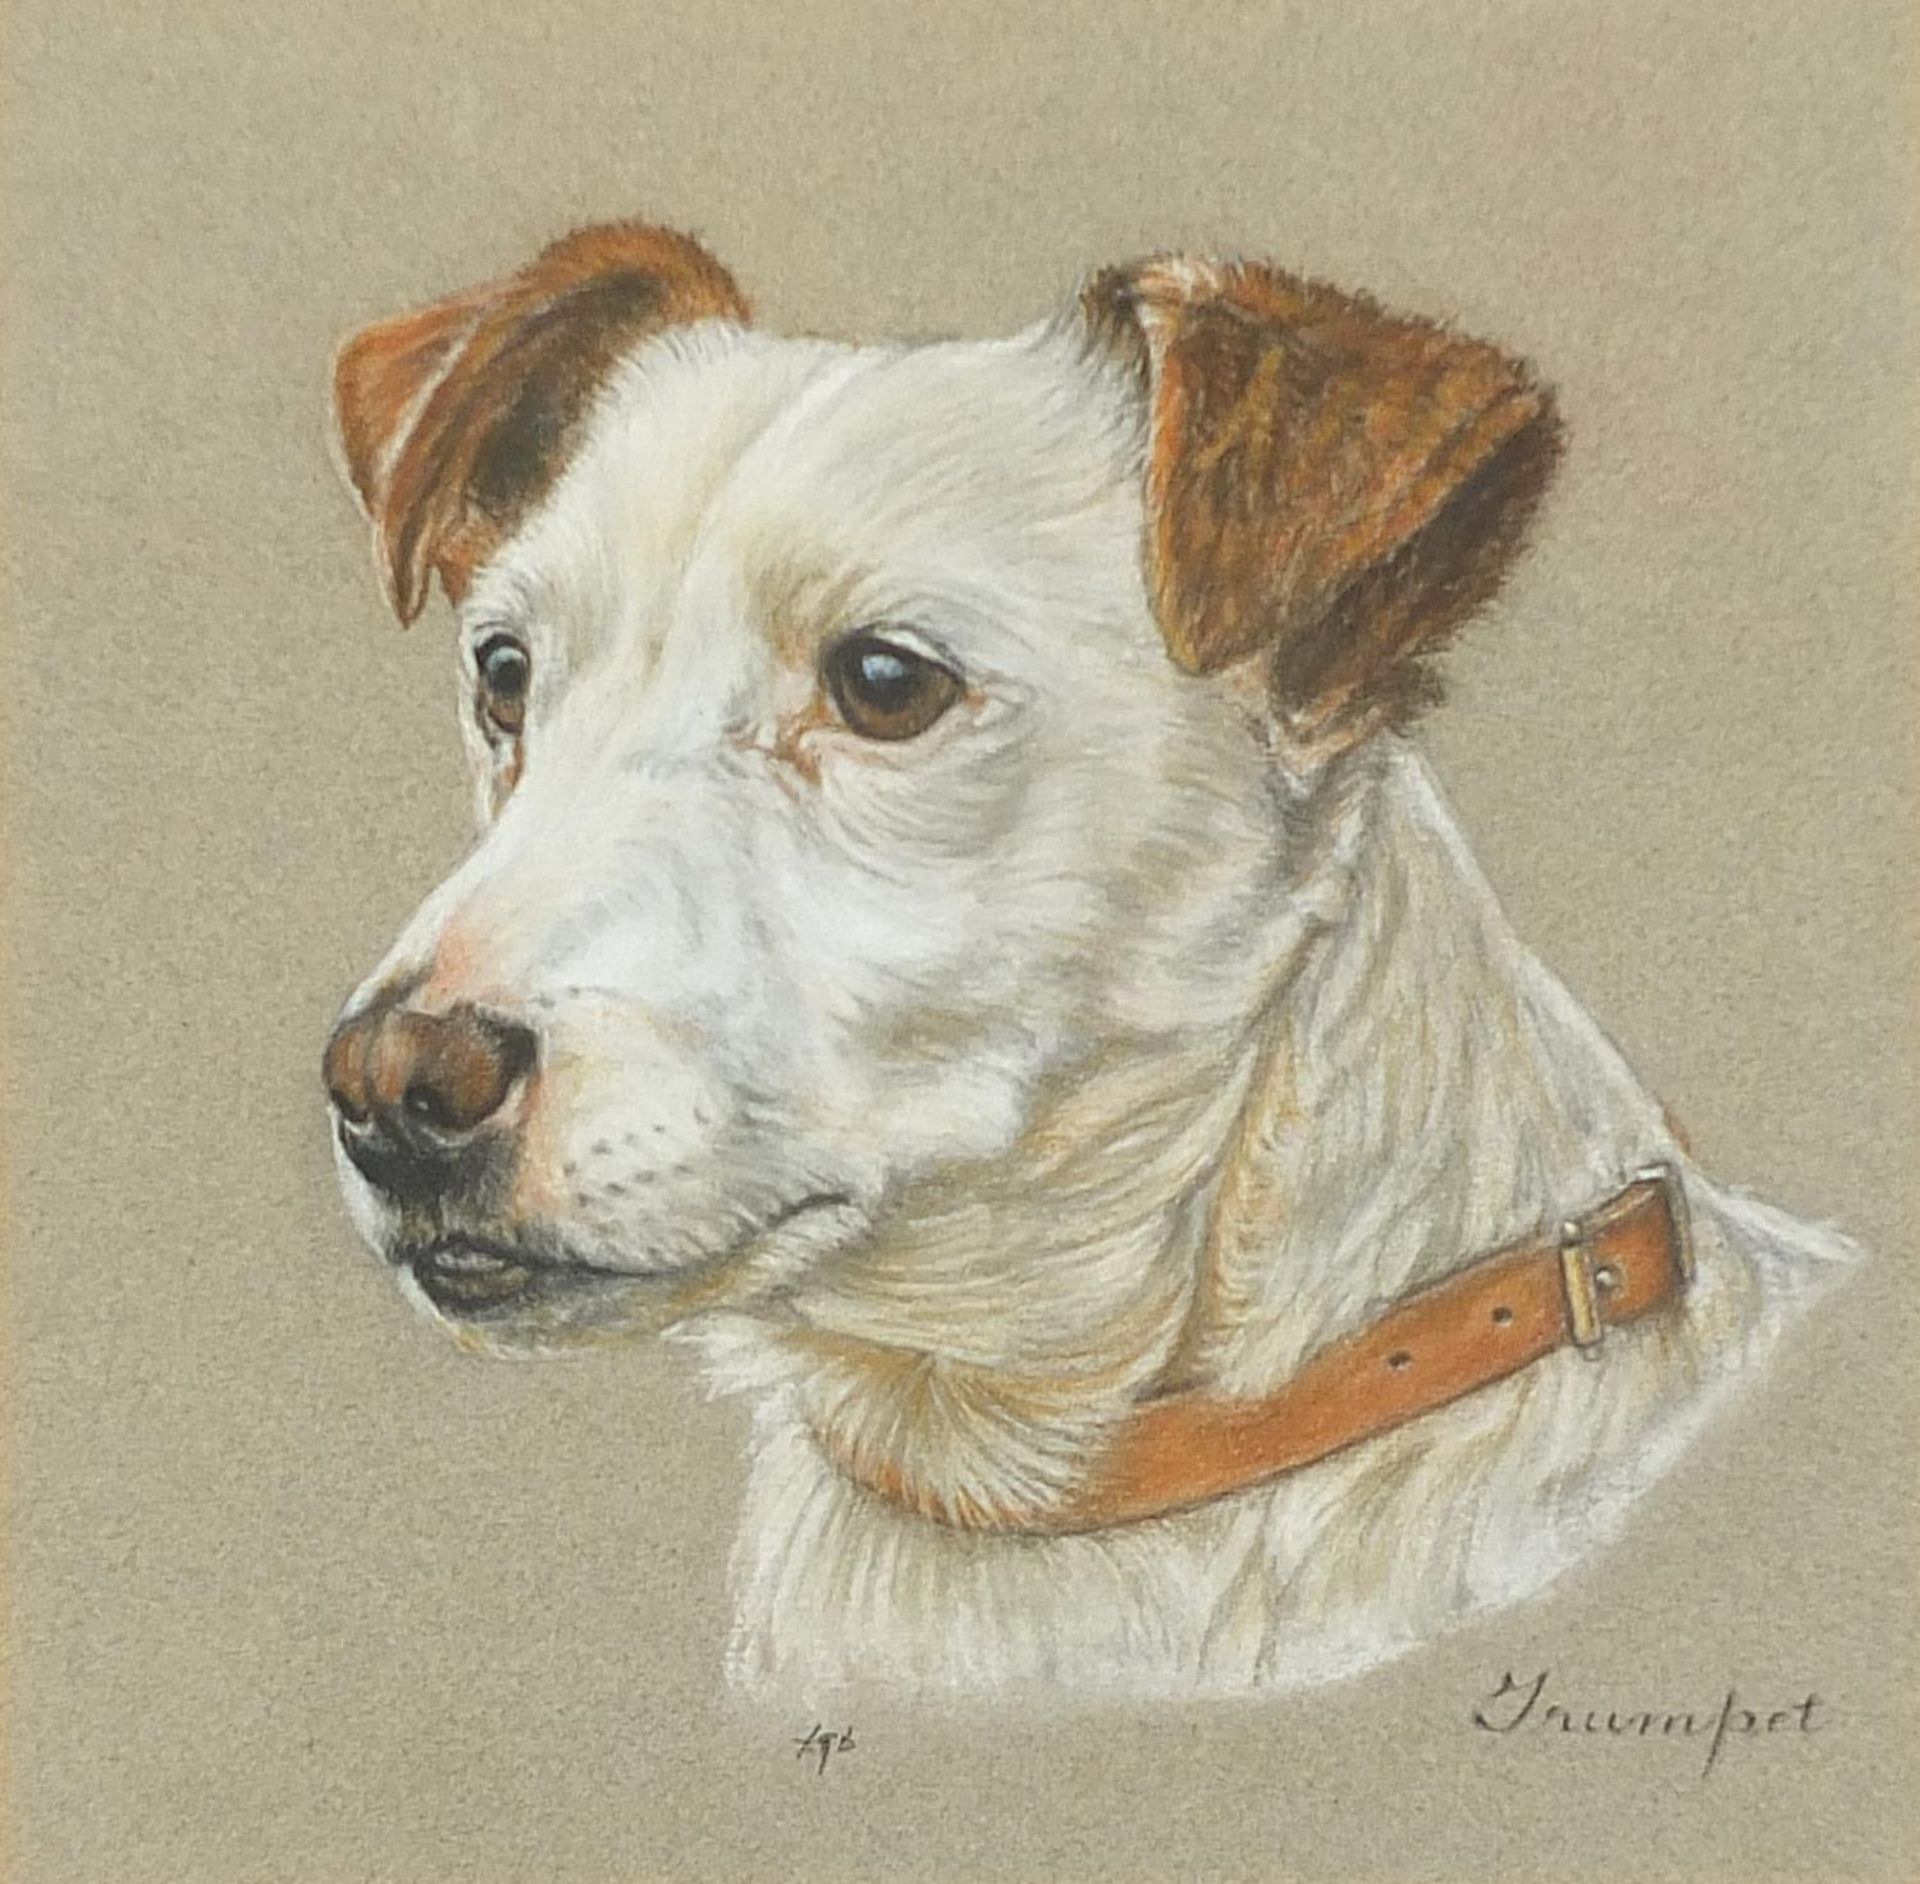 Portrait of a Terrier, pastel, mounted, framed and glazed, 24.5cm x 24.5cm excluding the mount and